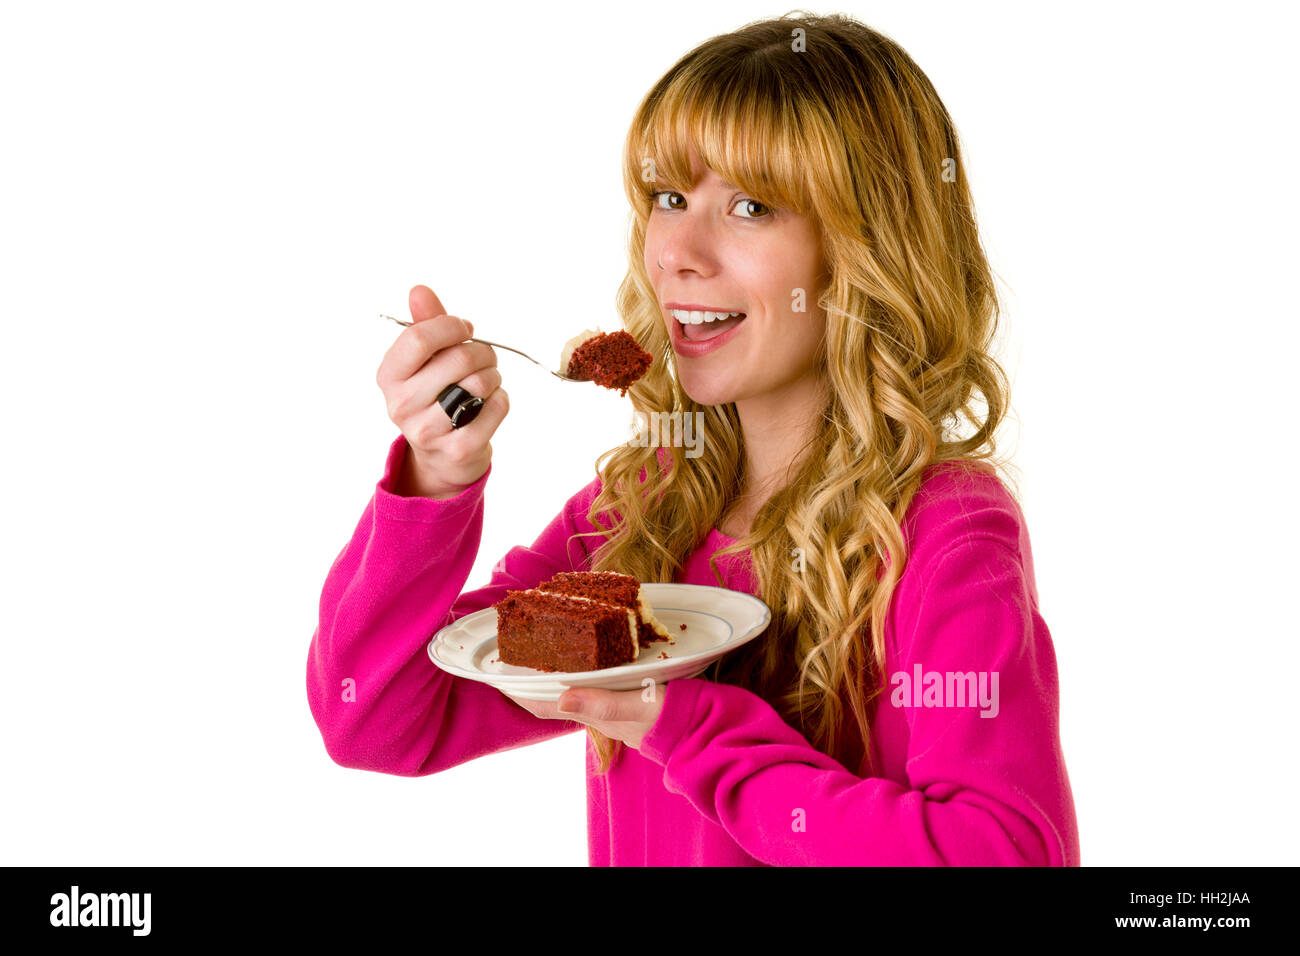 An attractive blonde woman enjoying a piece of cake Stock Photo